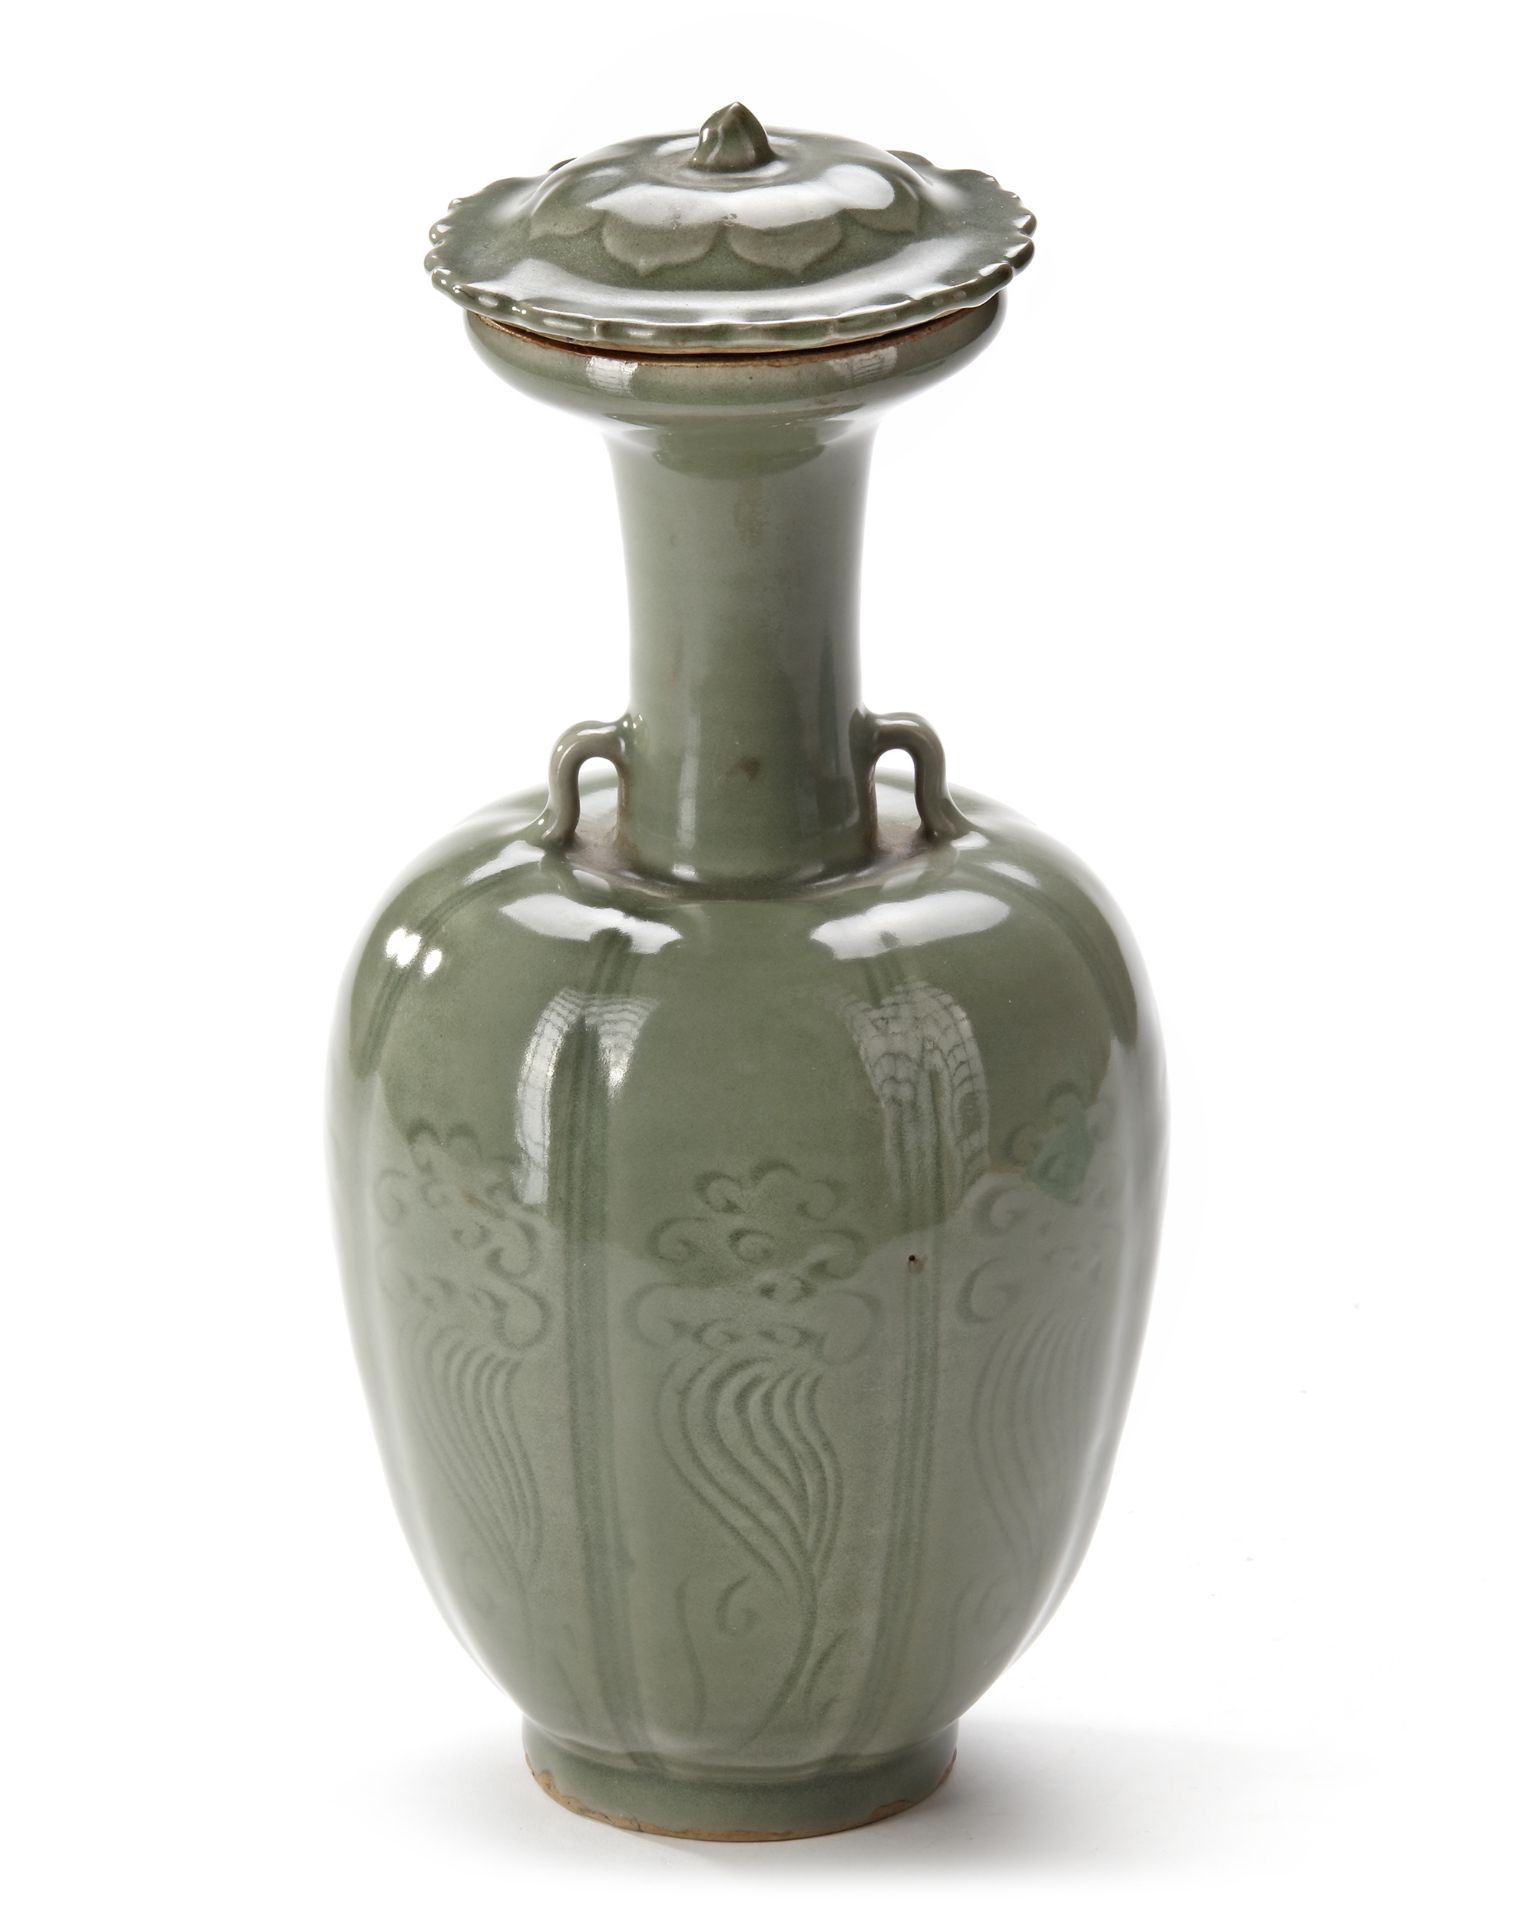 A CHINESE LONGQUAN CELADON GLAZED MELON-SHAPED VASE, SONG DYNASTY (960-1279) - Image 2 of 4